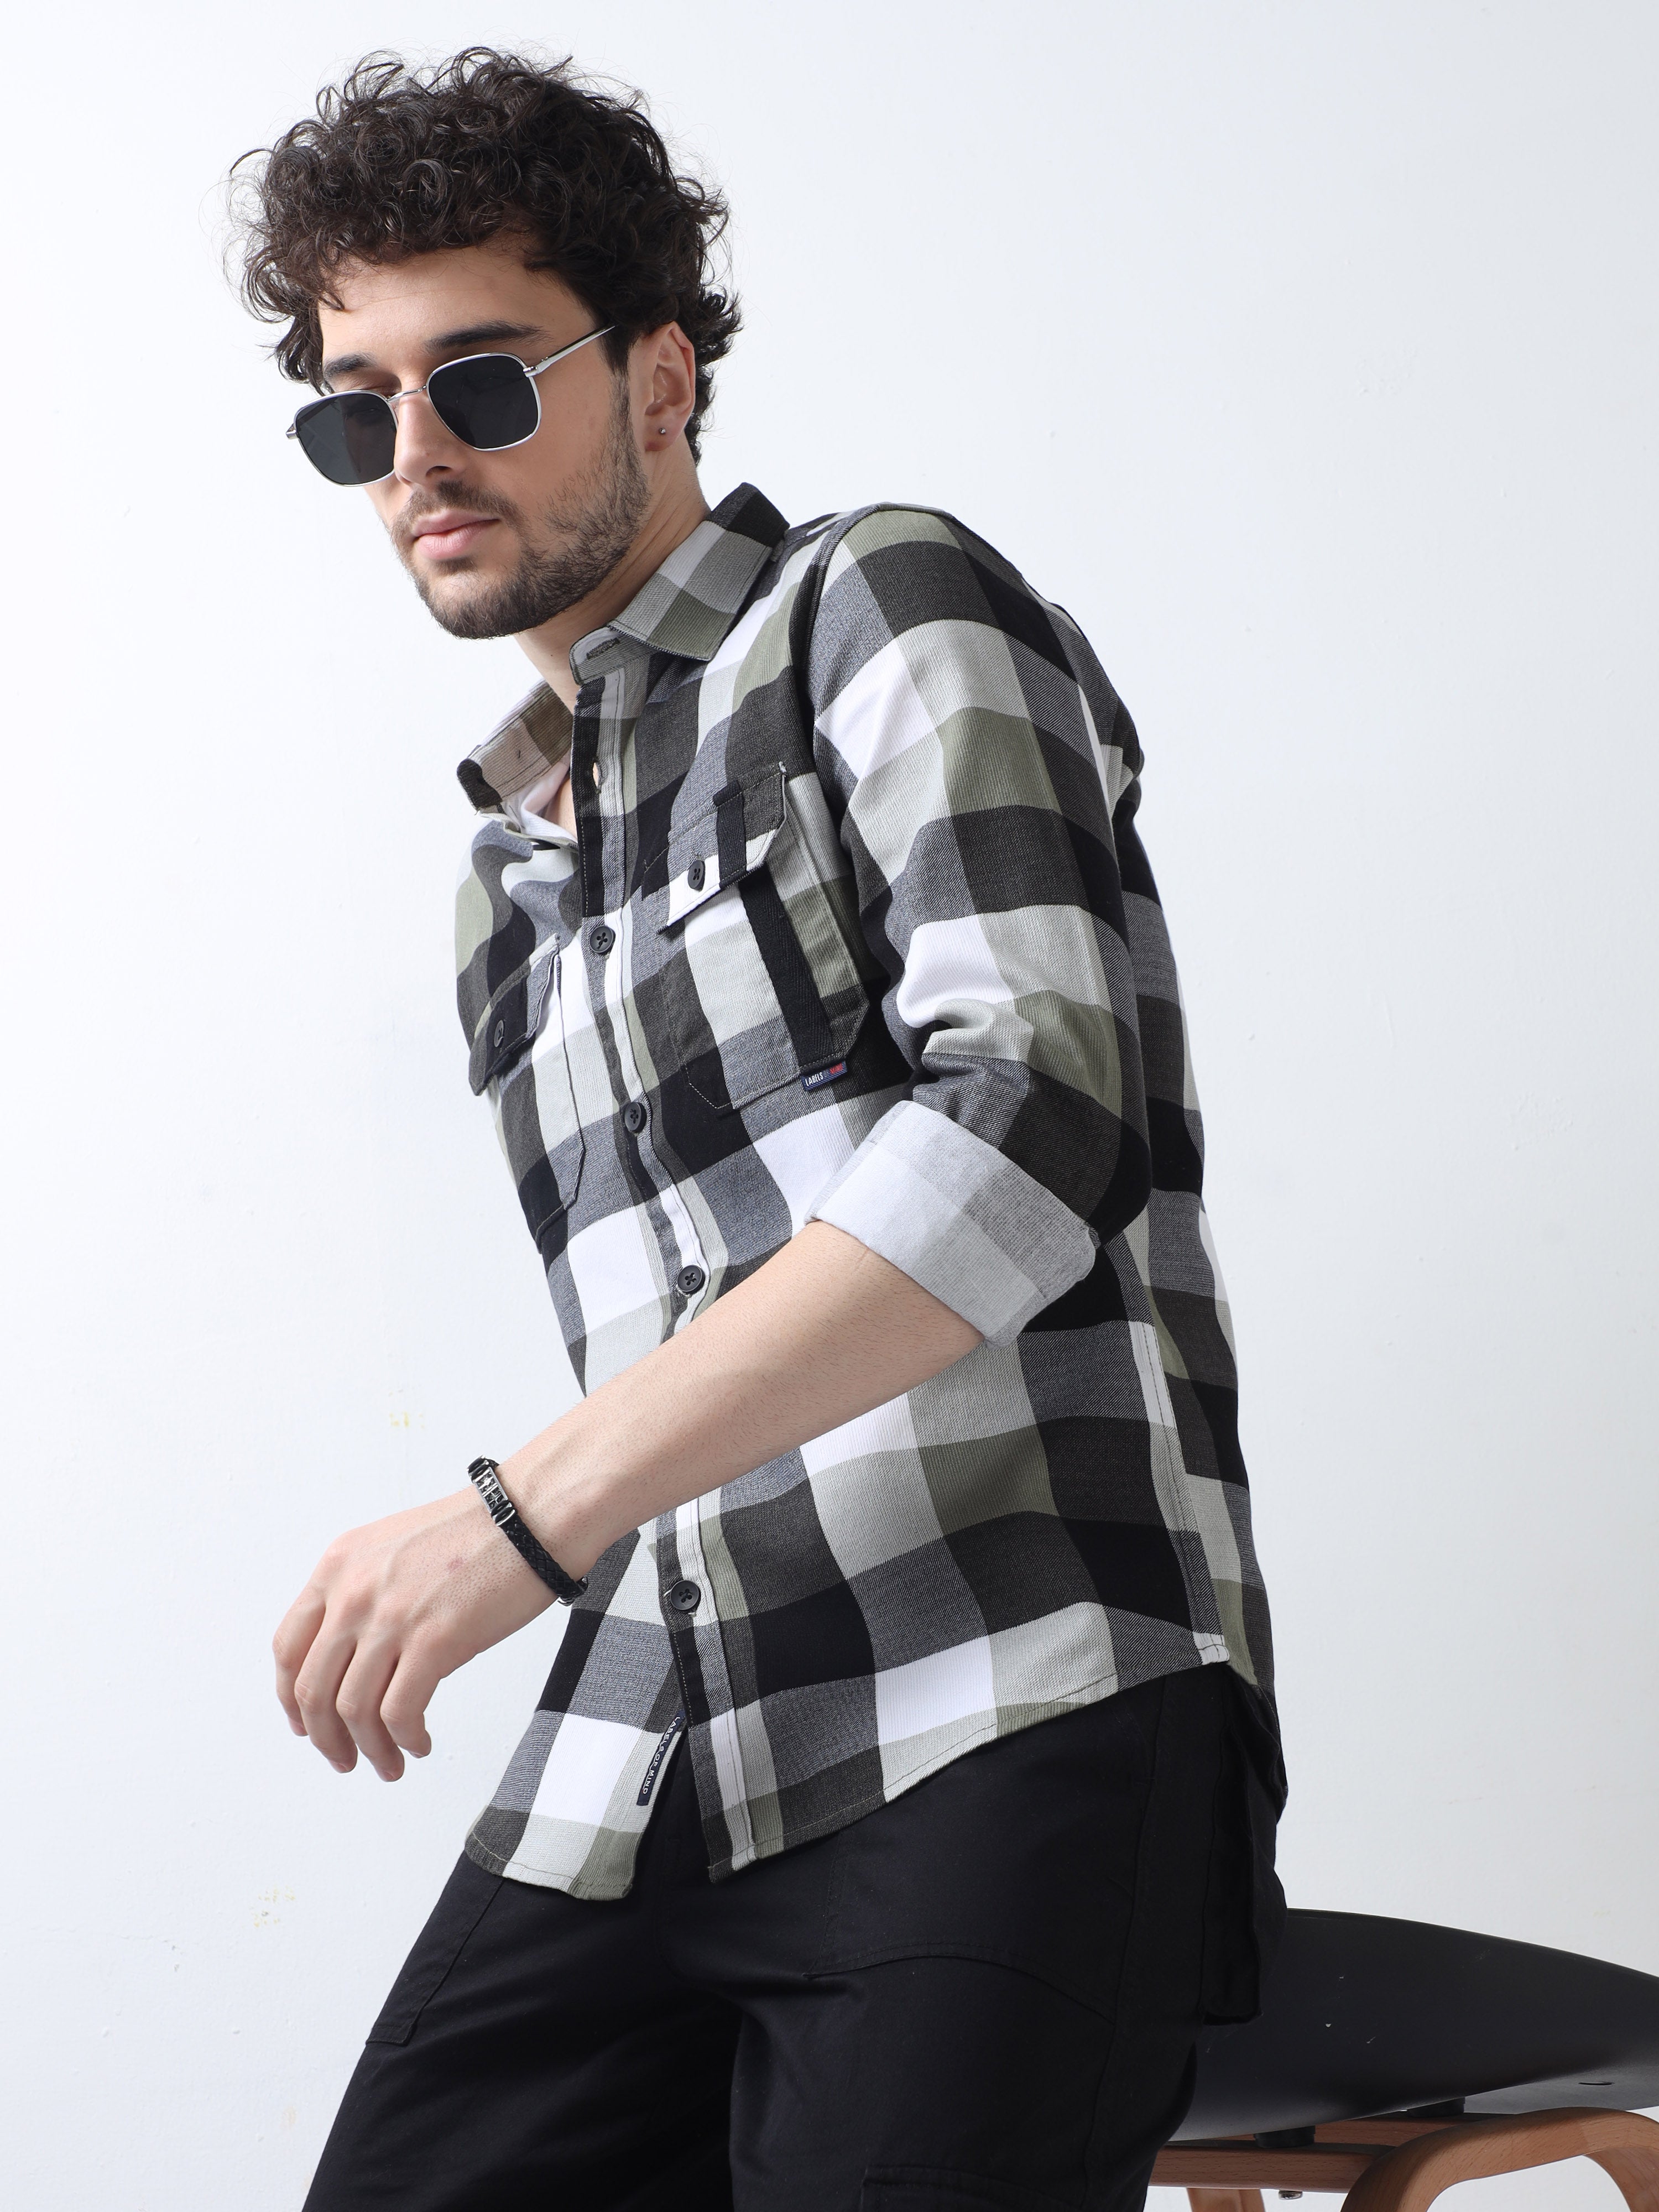 Shop Stylish olive green check shirt at Great priceRs. 1359.00